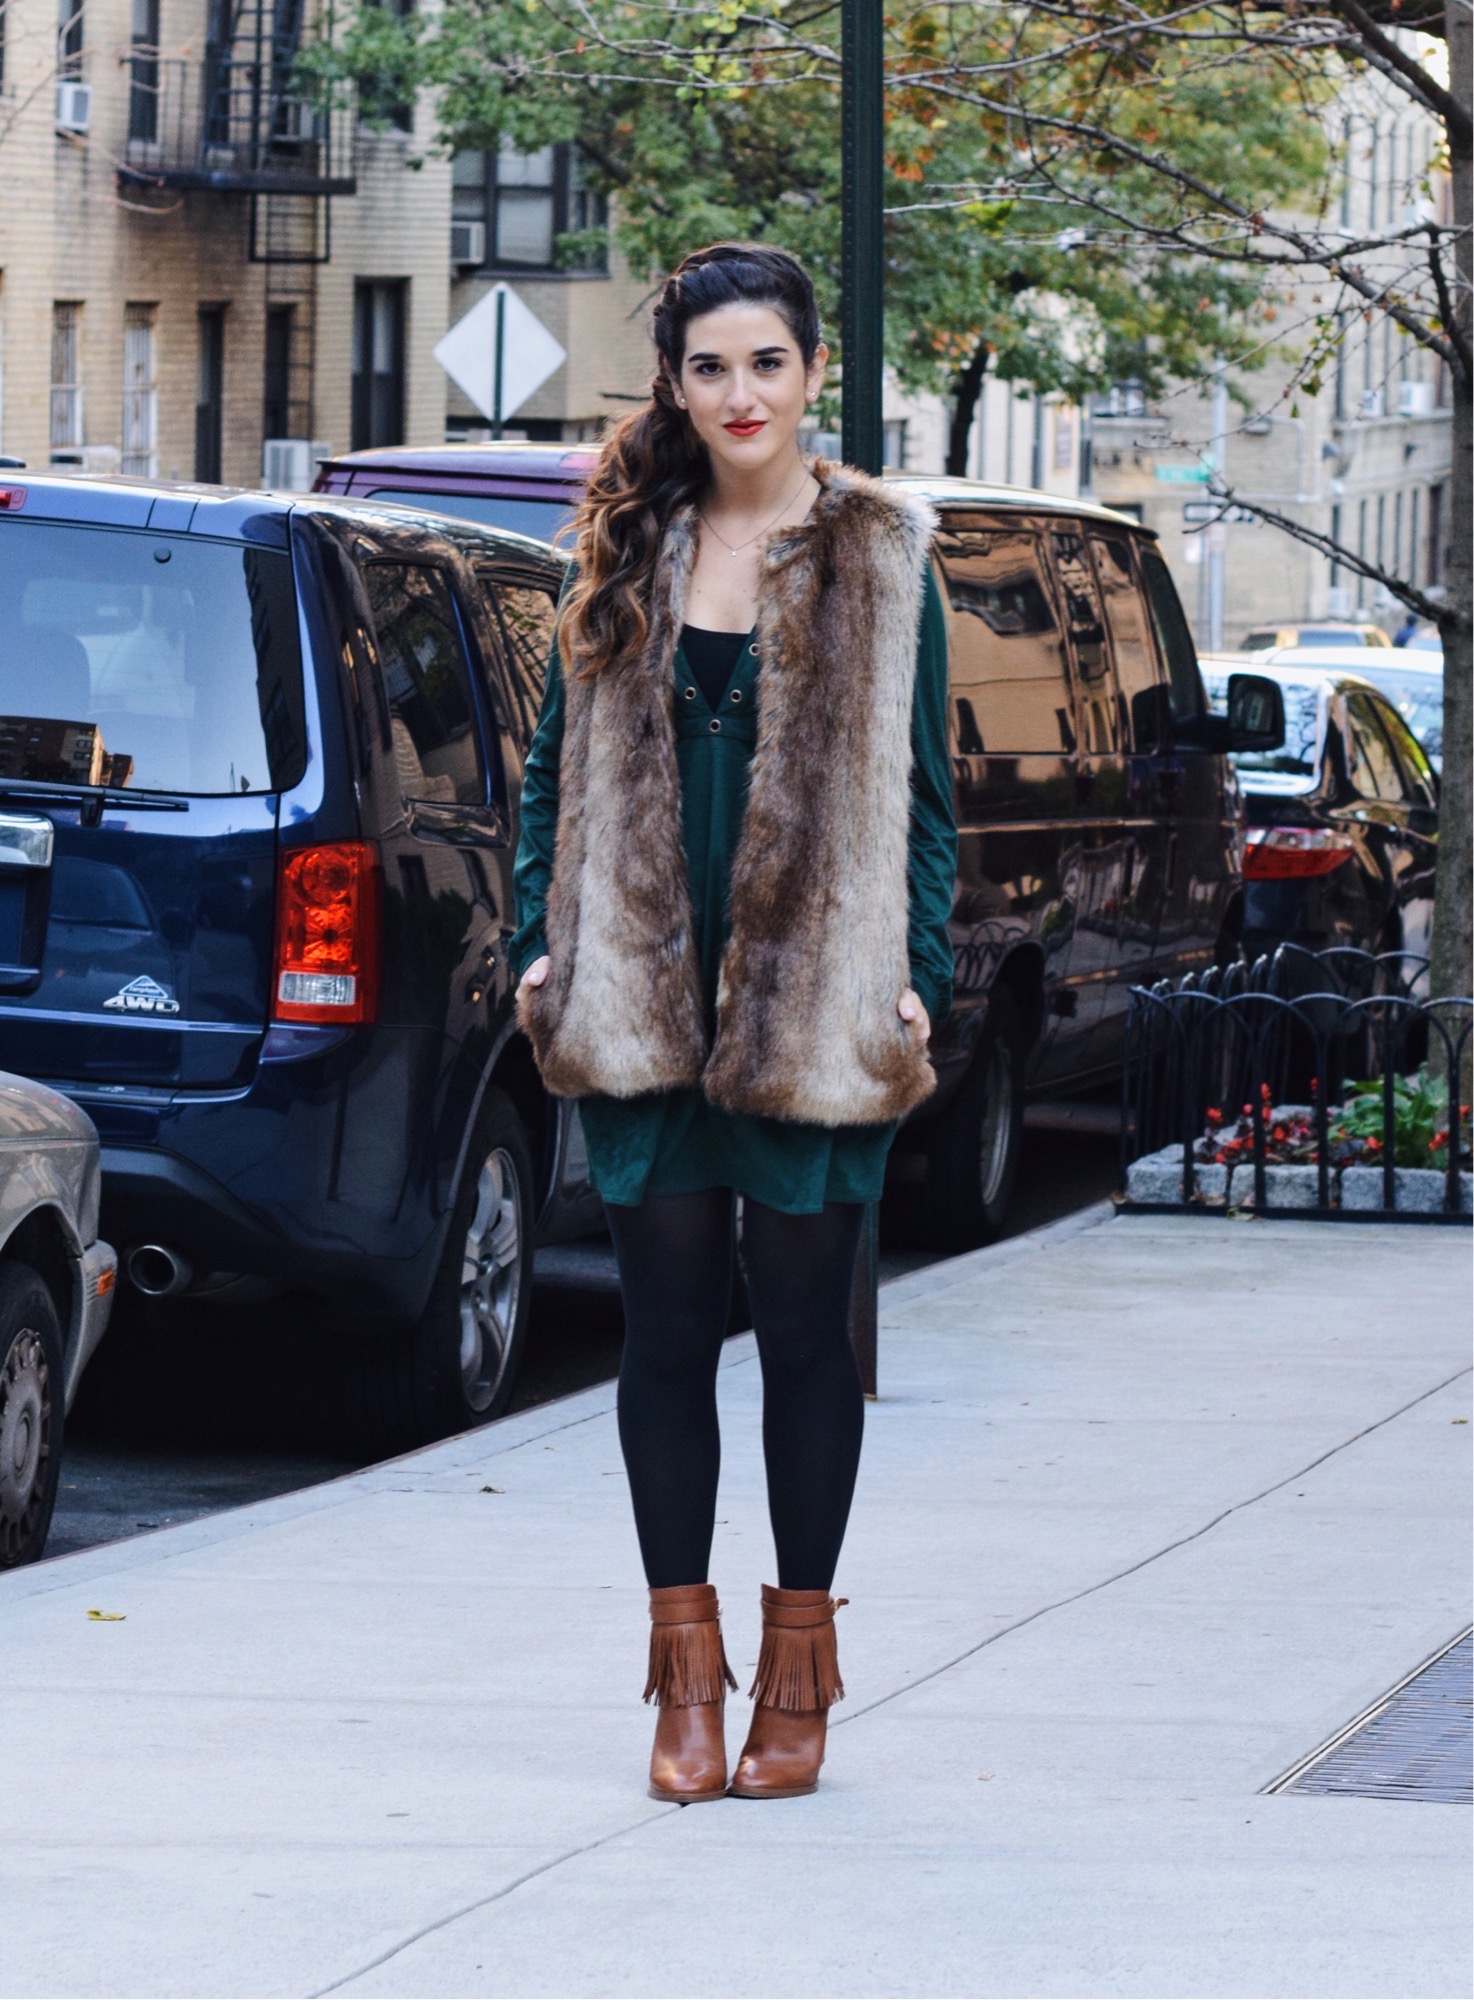 Suede Eyelet Dress Trescool Louboutins & Love Fashion Blog Esther Santer Street Style NYC Blogger Fall Winter Black Tights Ivanka Trump Fringe Booties Camel Hair Girl Women Beautiful Photoshoot Model Trendy Zara Fur Vest Outfit OOTD Inspo What To Wear.JPG